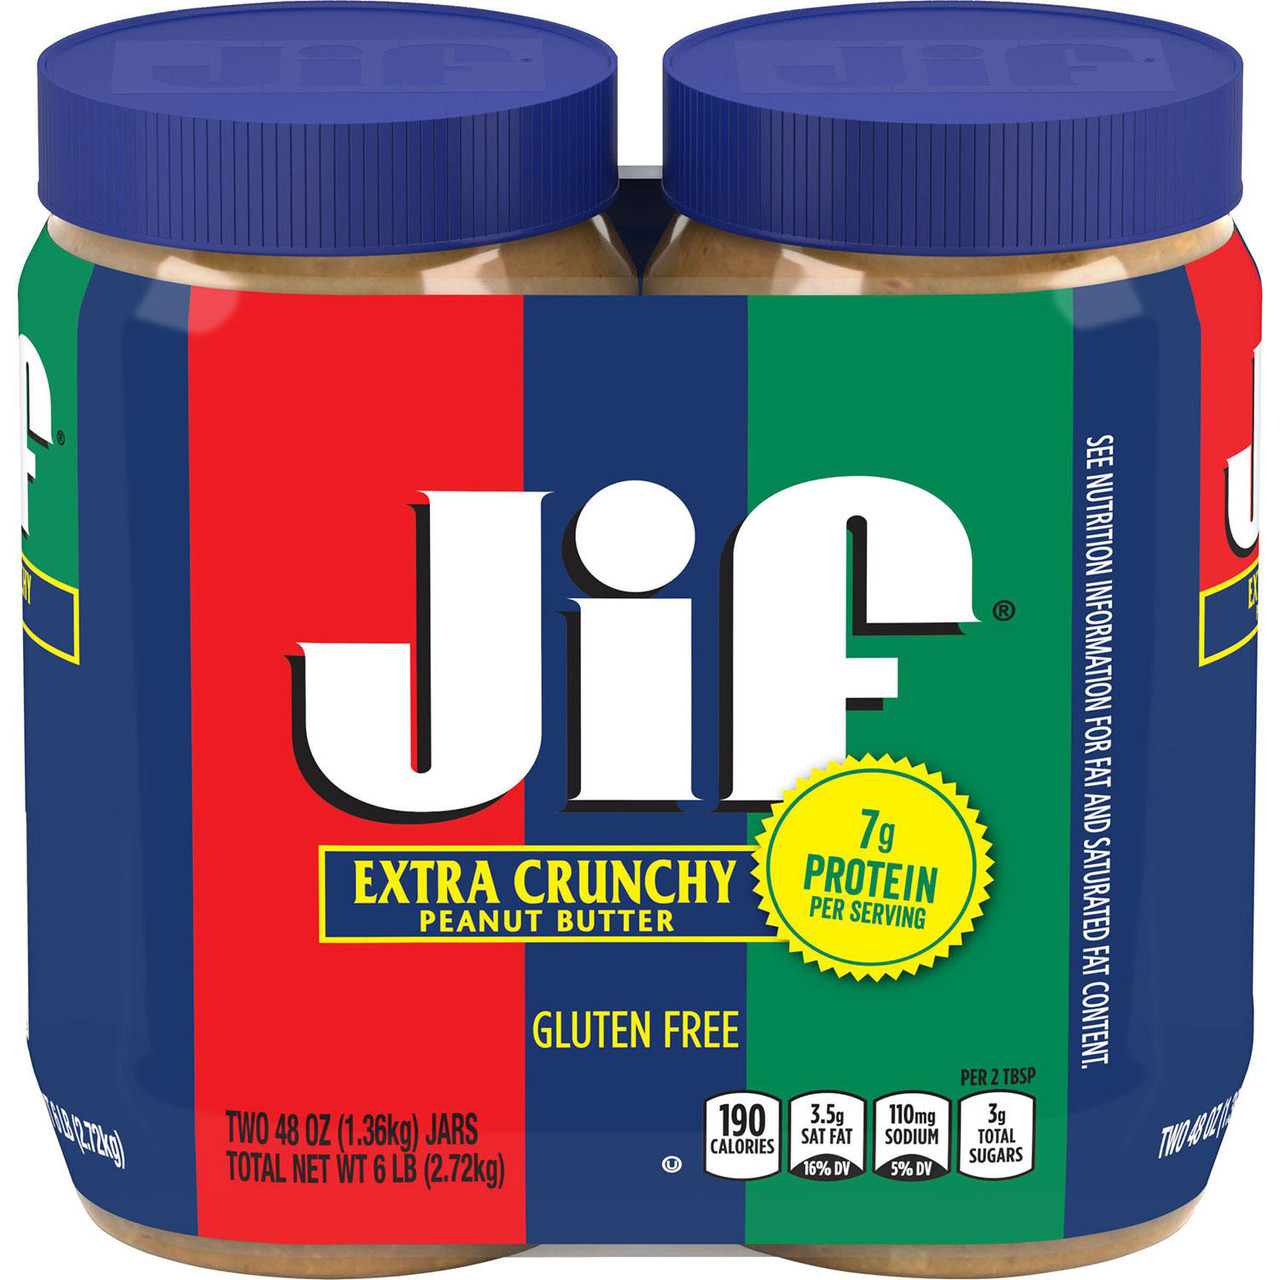 Jif Extra Crunchy Peanut Butter (48 oz., 2 pk.) - [From 46.00 - Choose pk Qty ] - *Ships from Miami